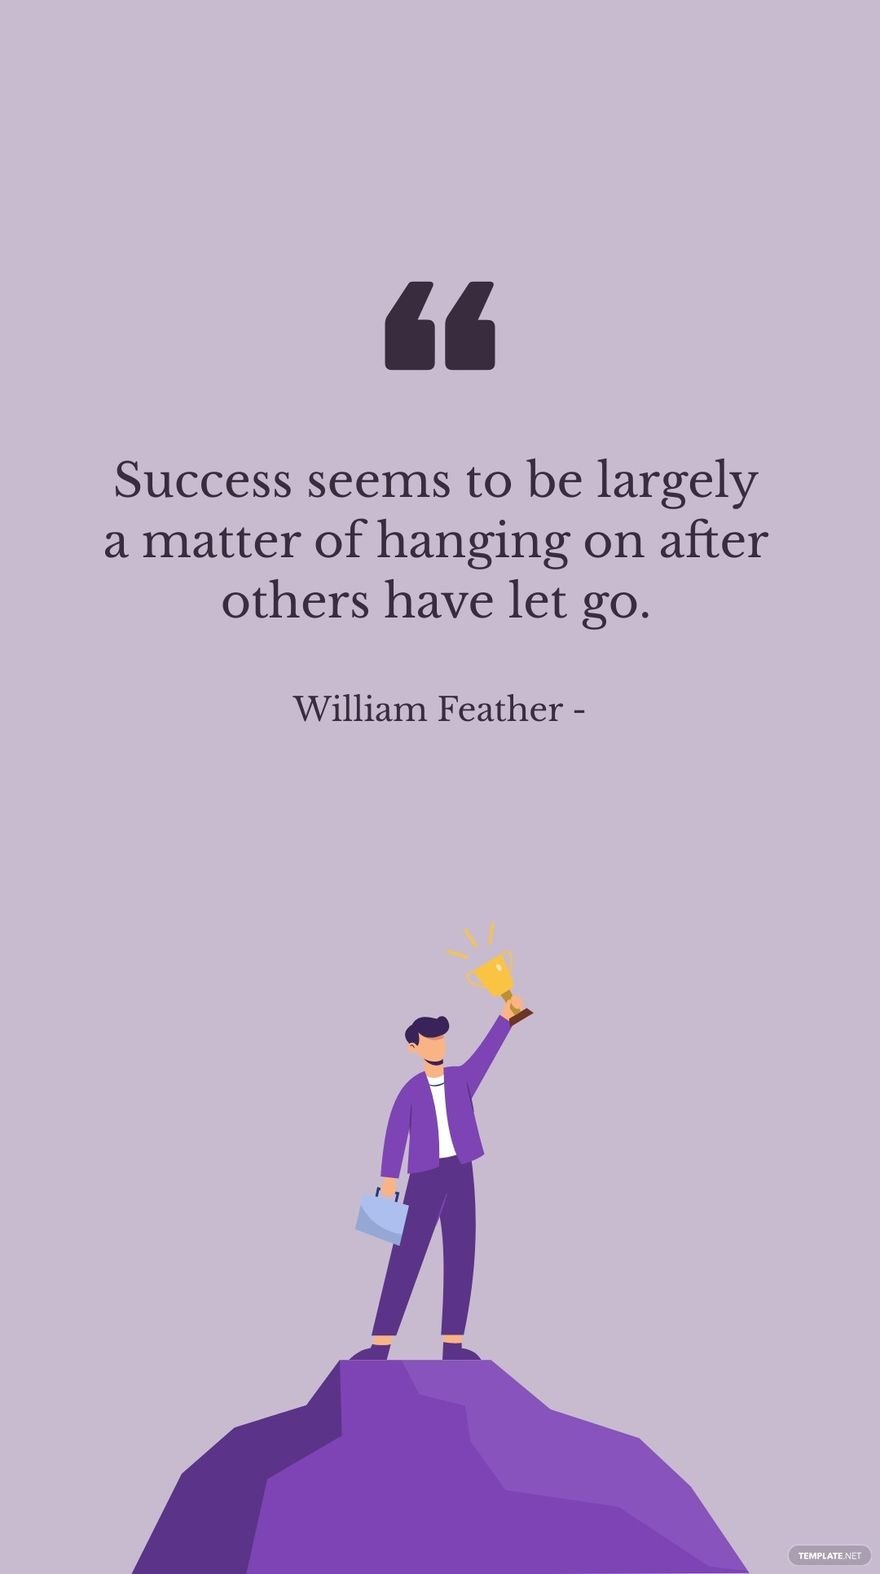 William Feather - Success seems to be largely a matter of hanging on after others have let go.